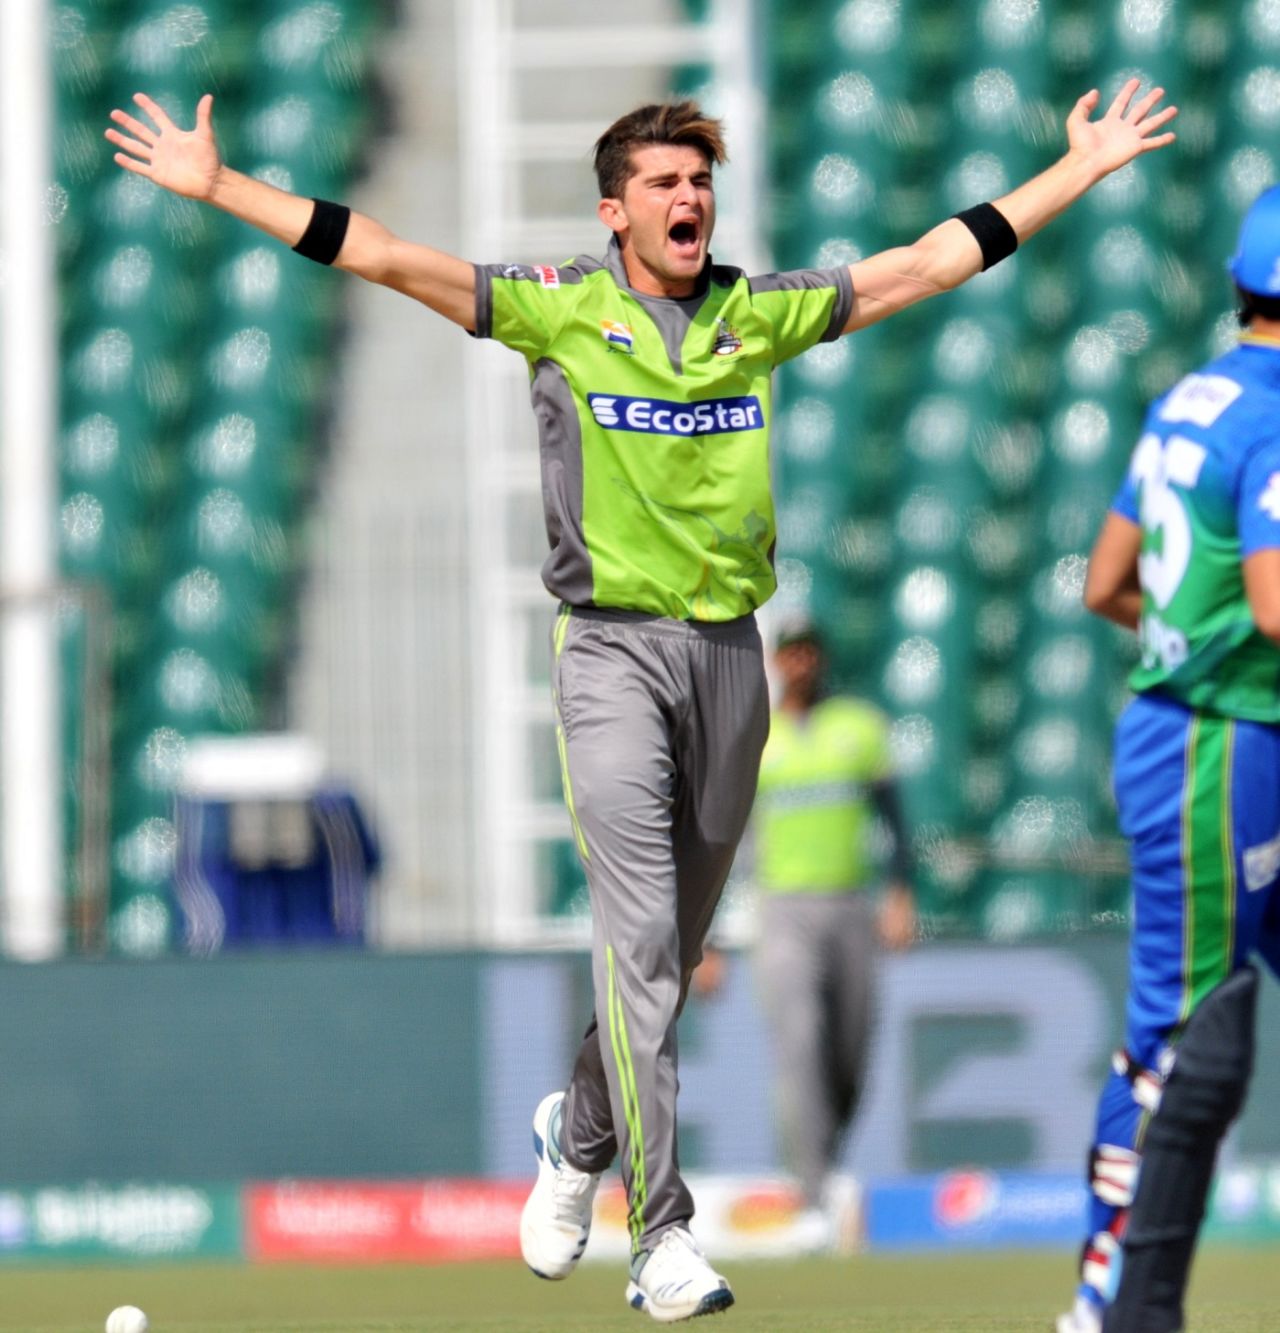 Shaheen Afridi struck in the first over, Lahore Qalandars v Multan Sultans, PSL 2020, Lahore, March 15, 2020